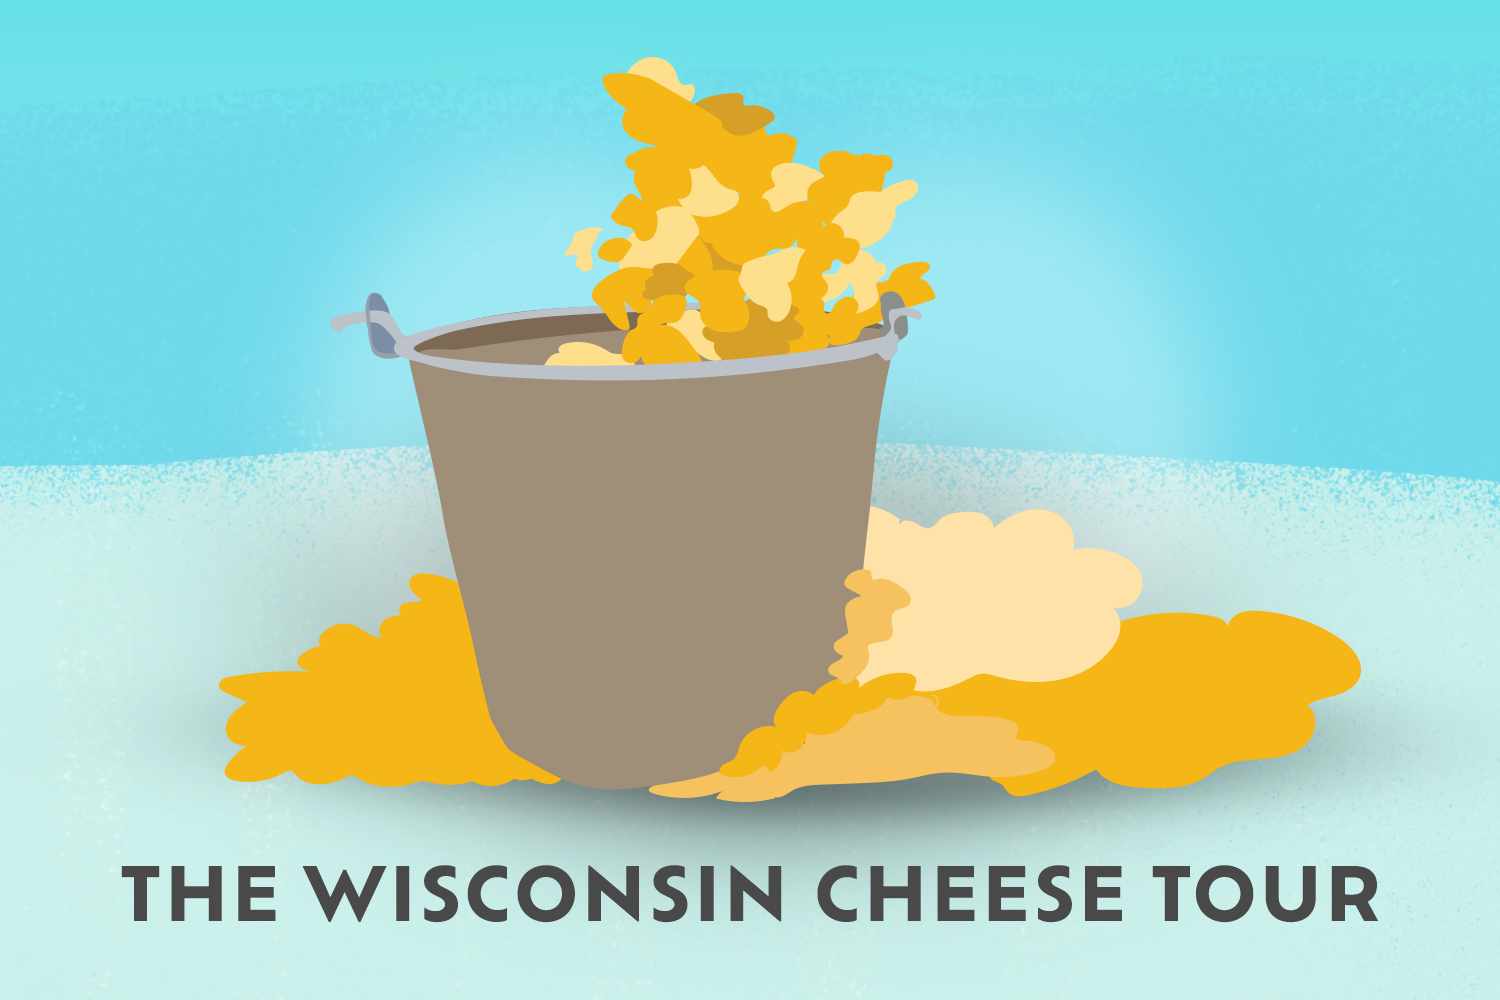 The Wisconsin Cheese Tour